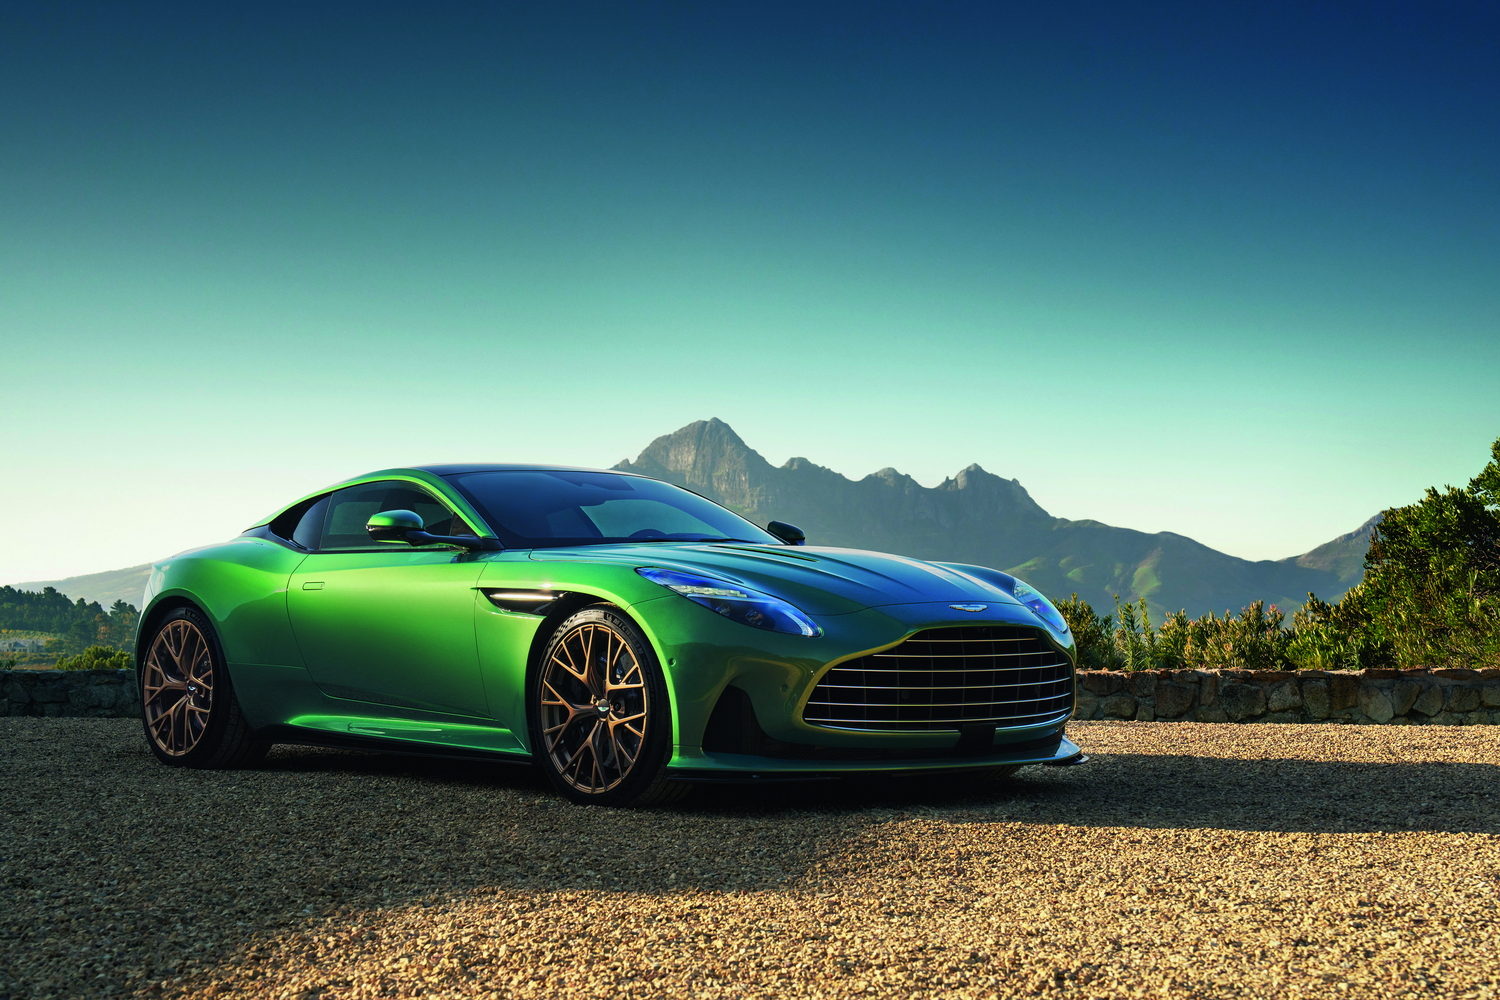 Car News | Aston Martin DB12 coupe revealed | CompleteCar.ie